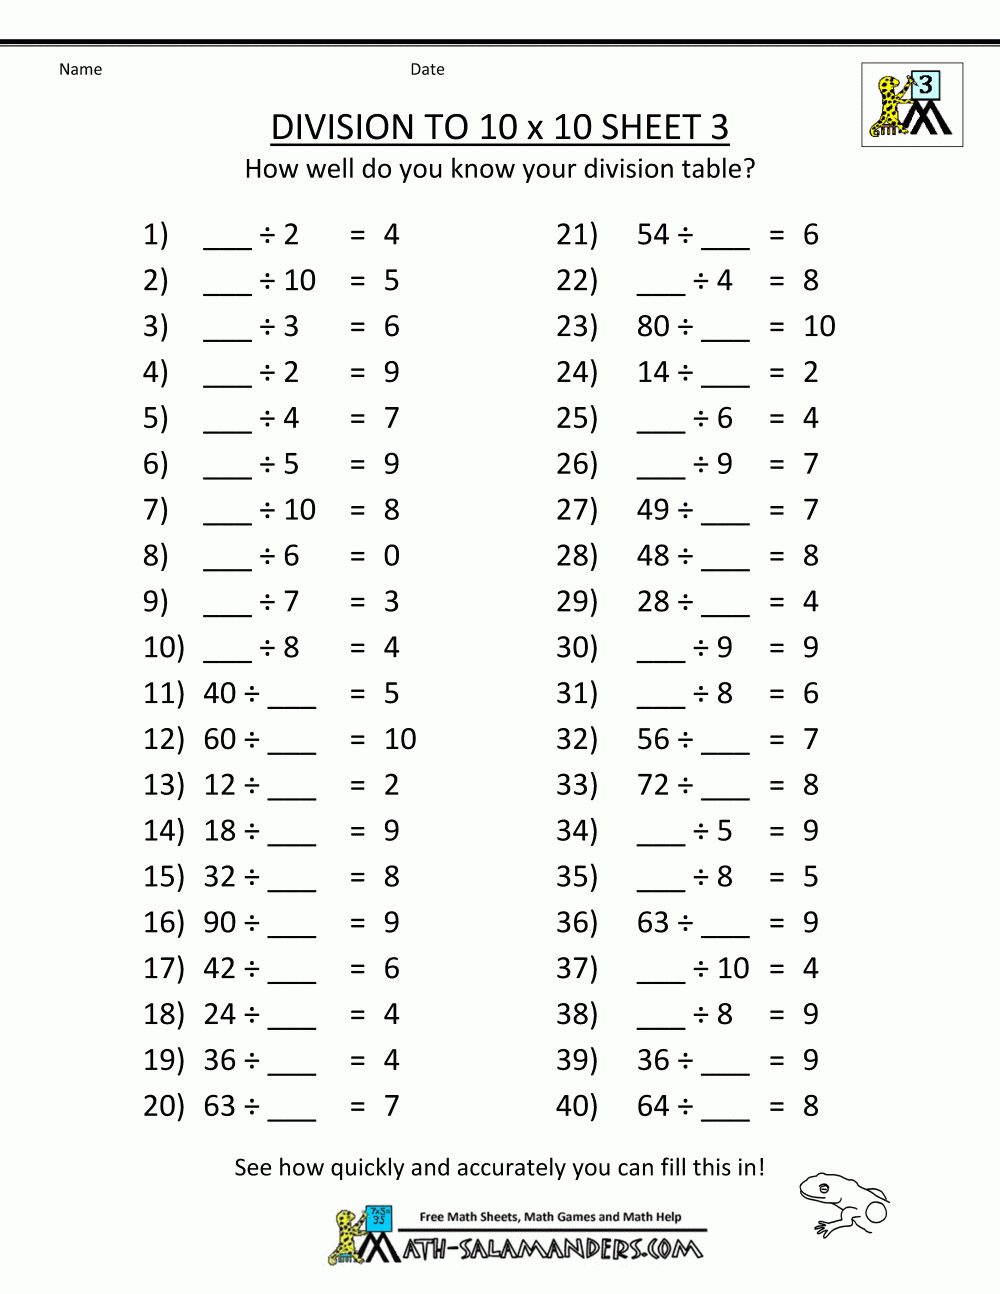 Ja 19 Grunner Til Math Division Grade 3 Below Is The Link To 2nd grade Math Page Where You 